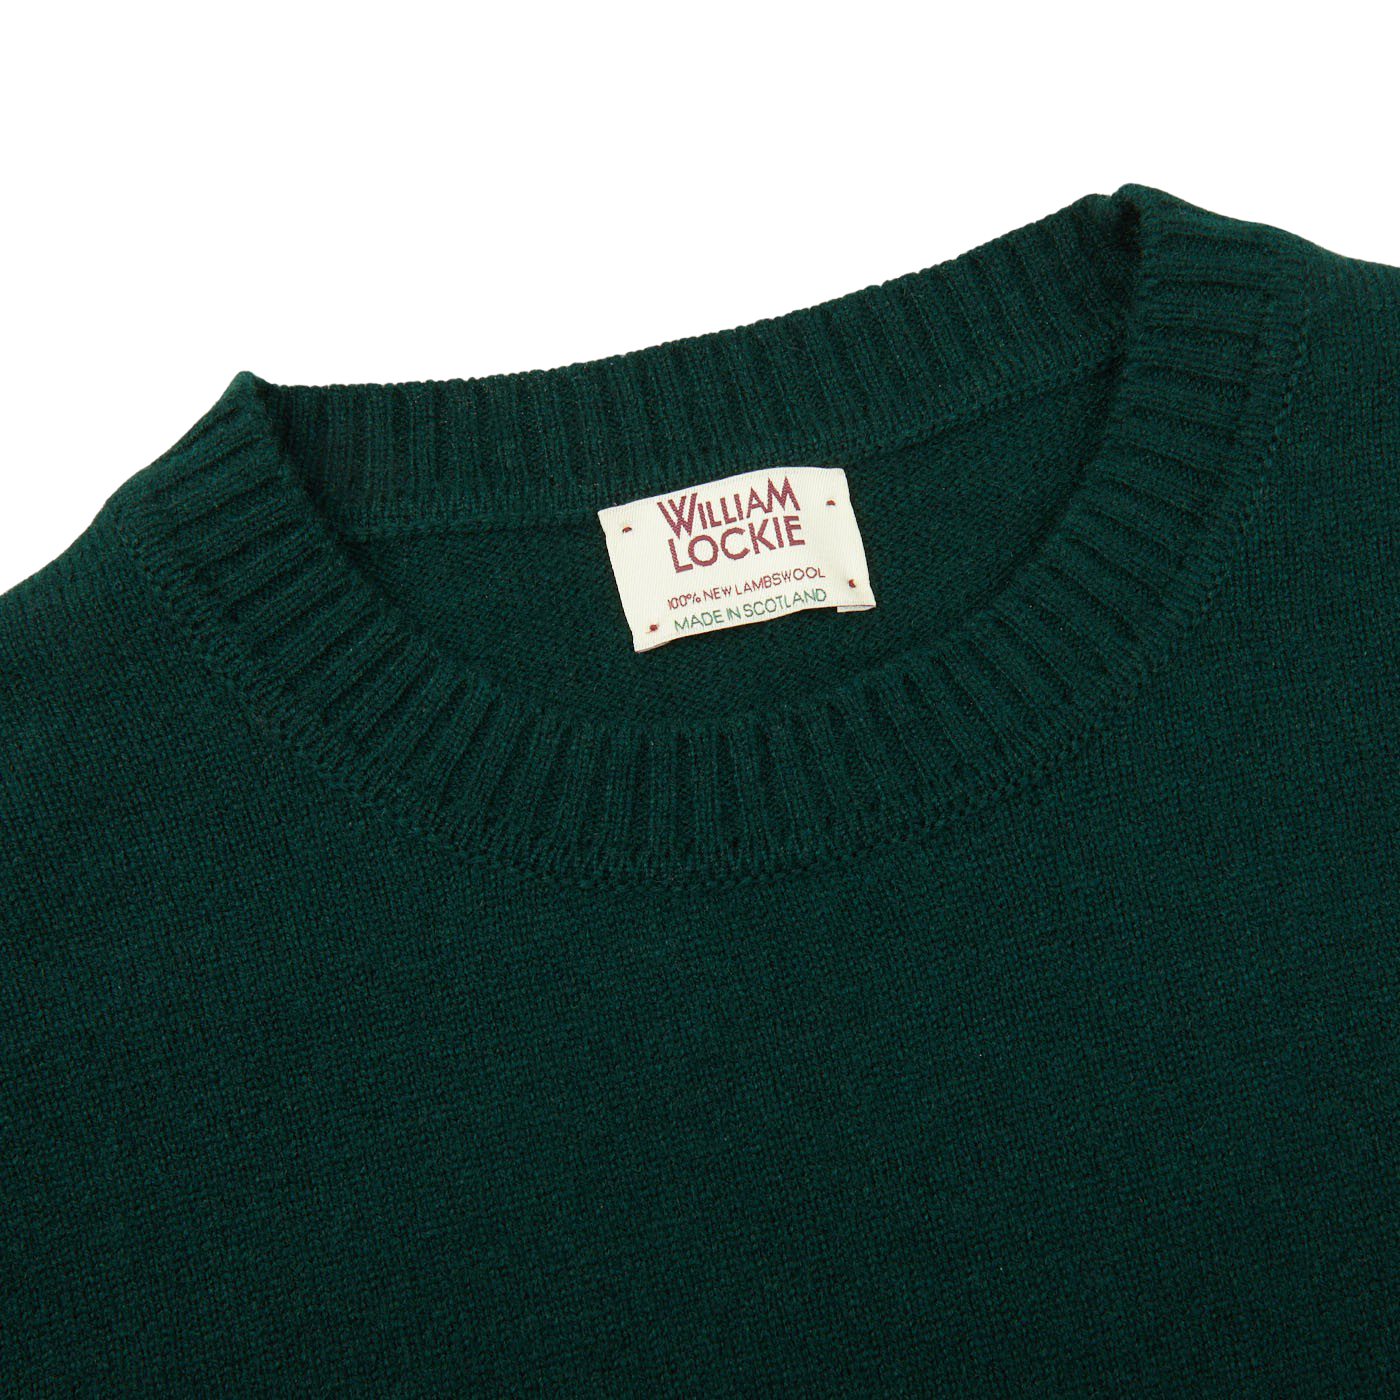 A William Lockie Tartan Green Crew Neck Lambswool Sweater with a label on it.